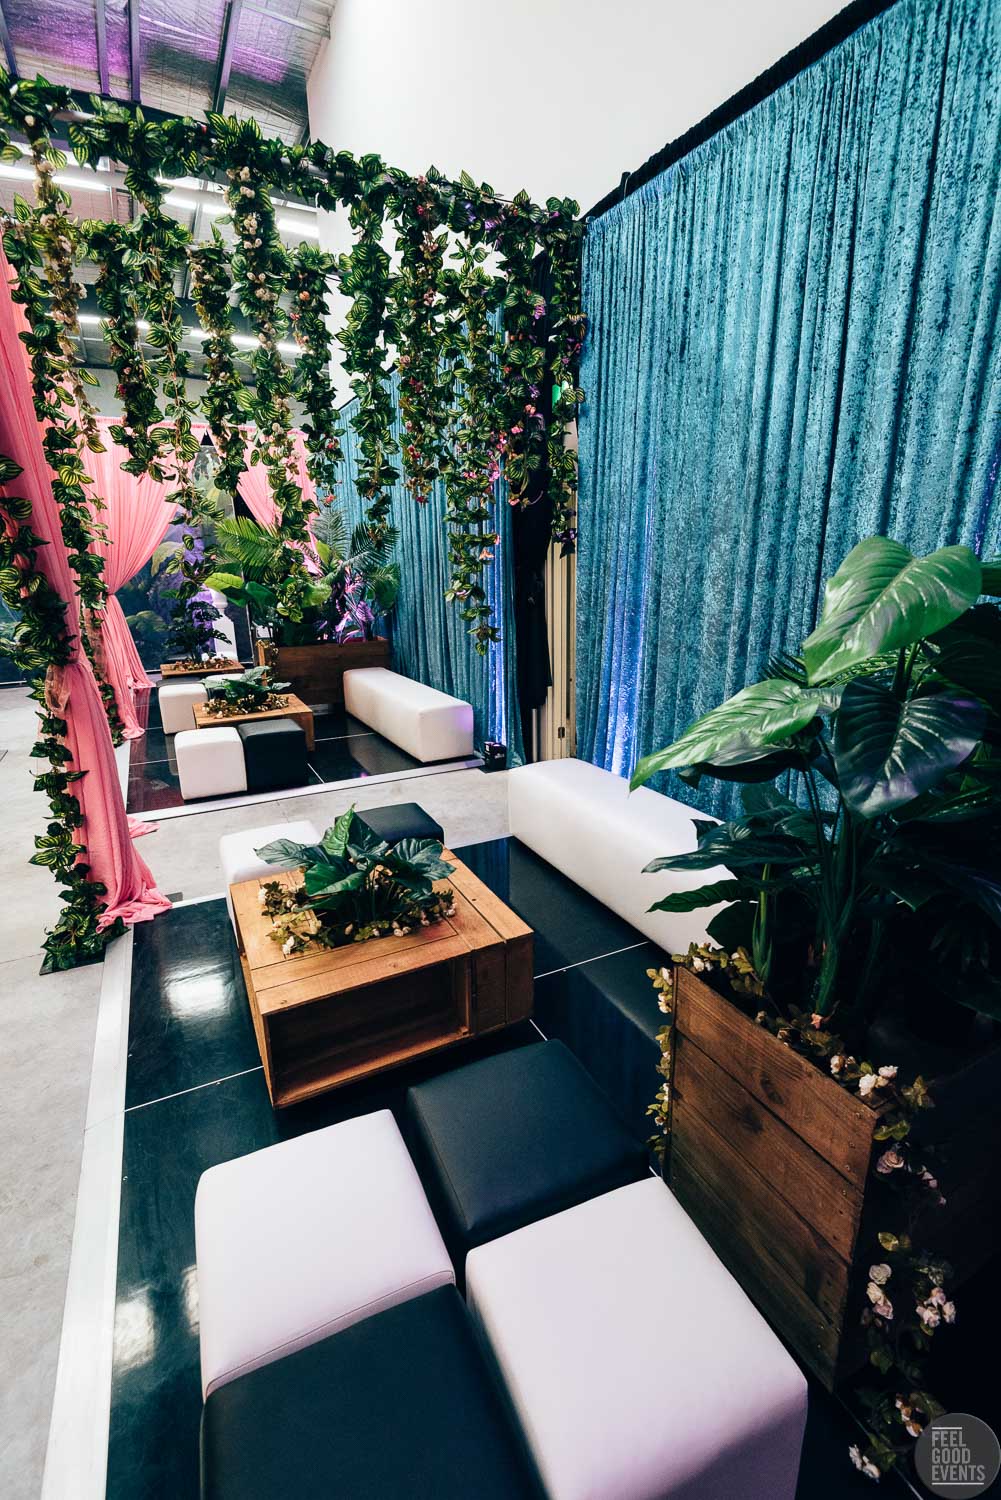 alice in wonderland themed event lounge furniture and artificial plants